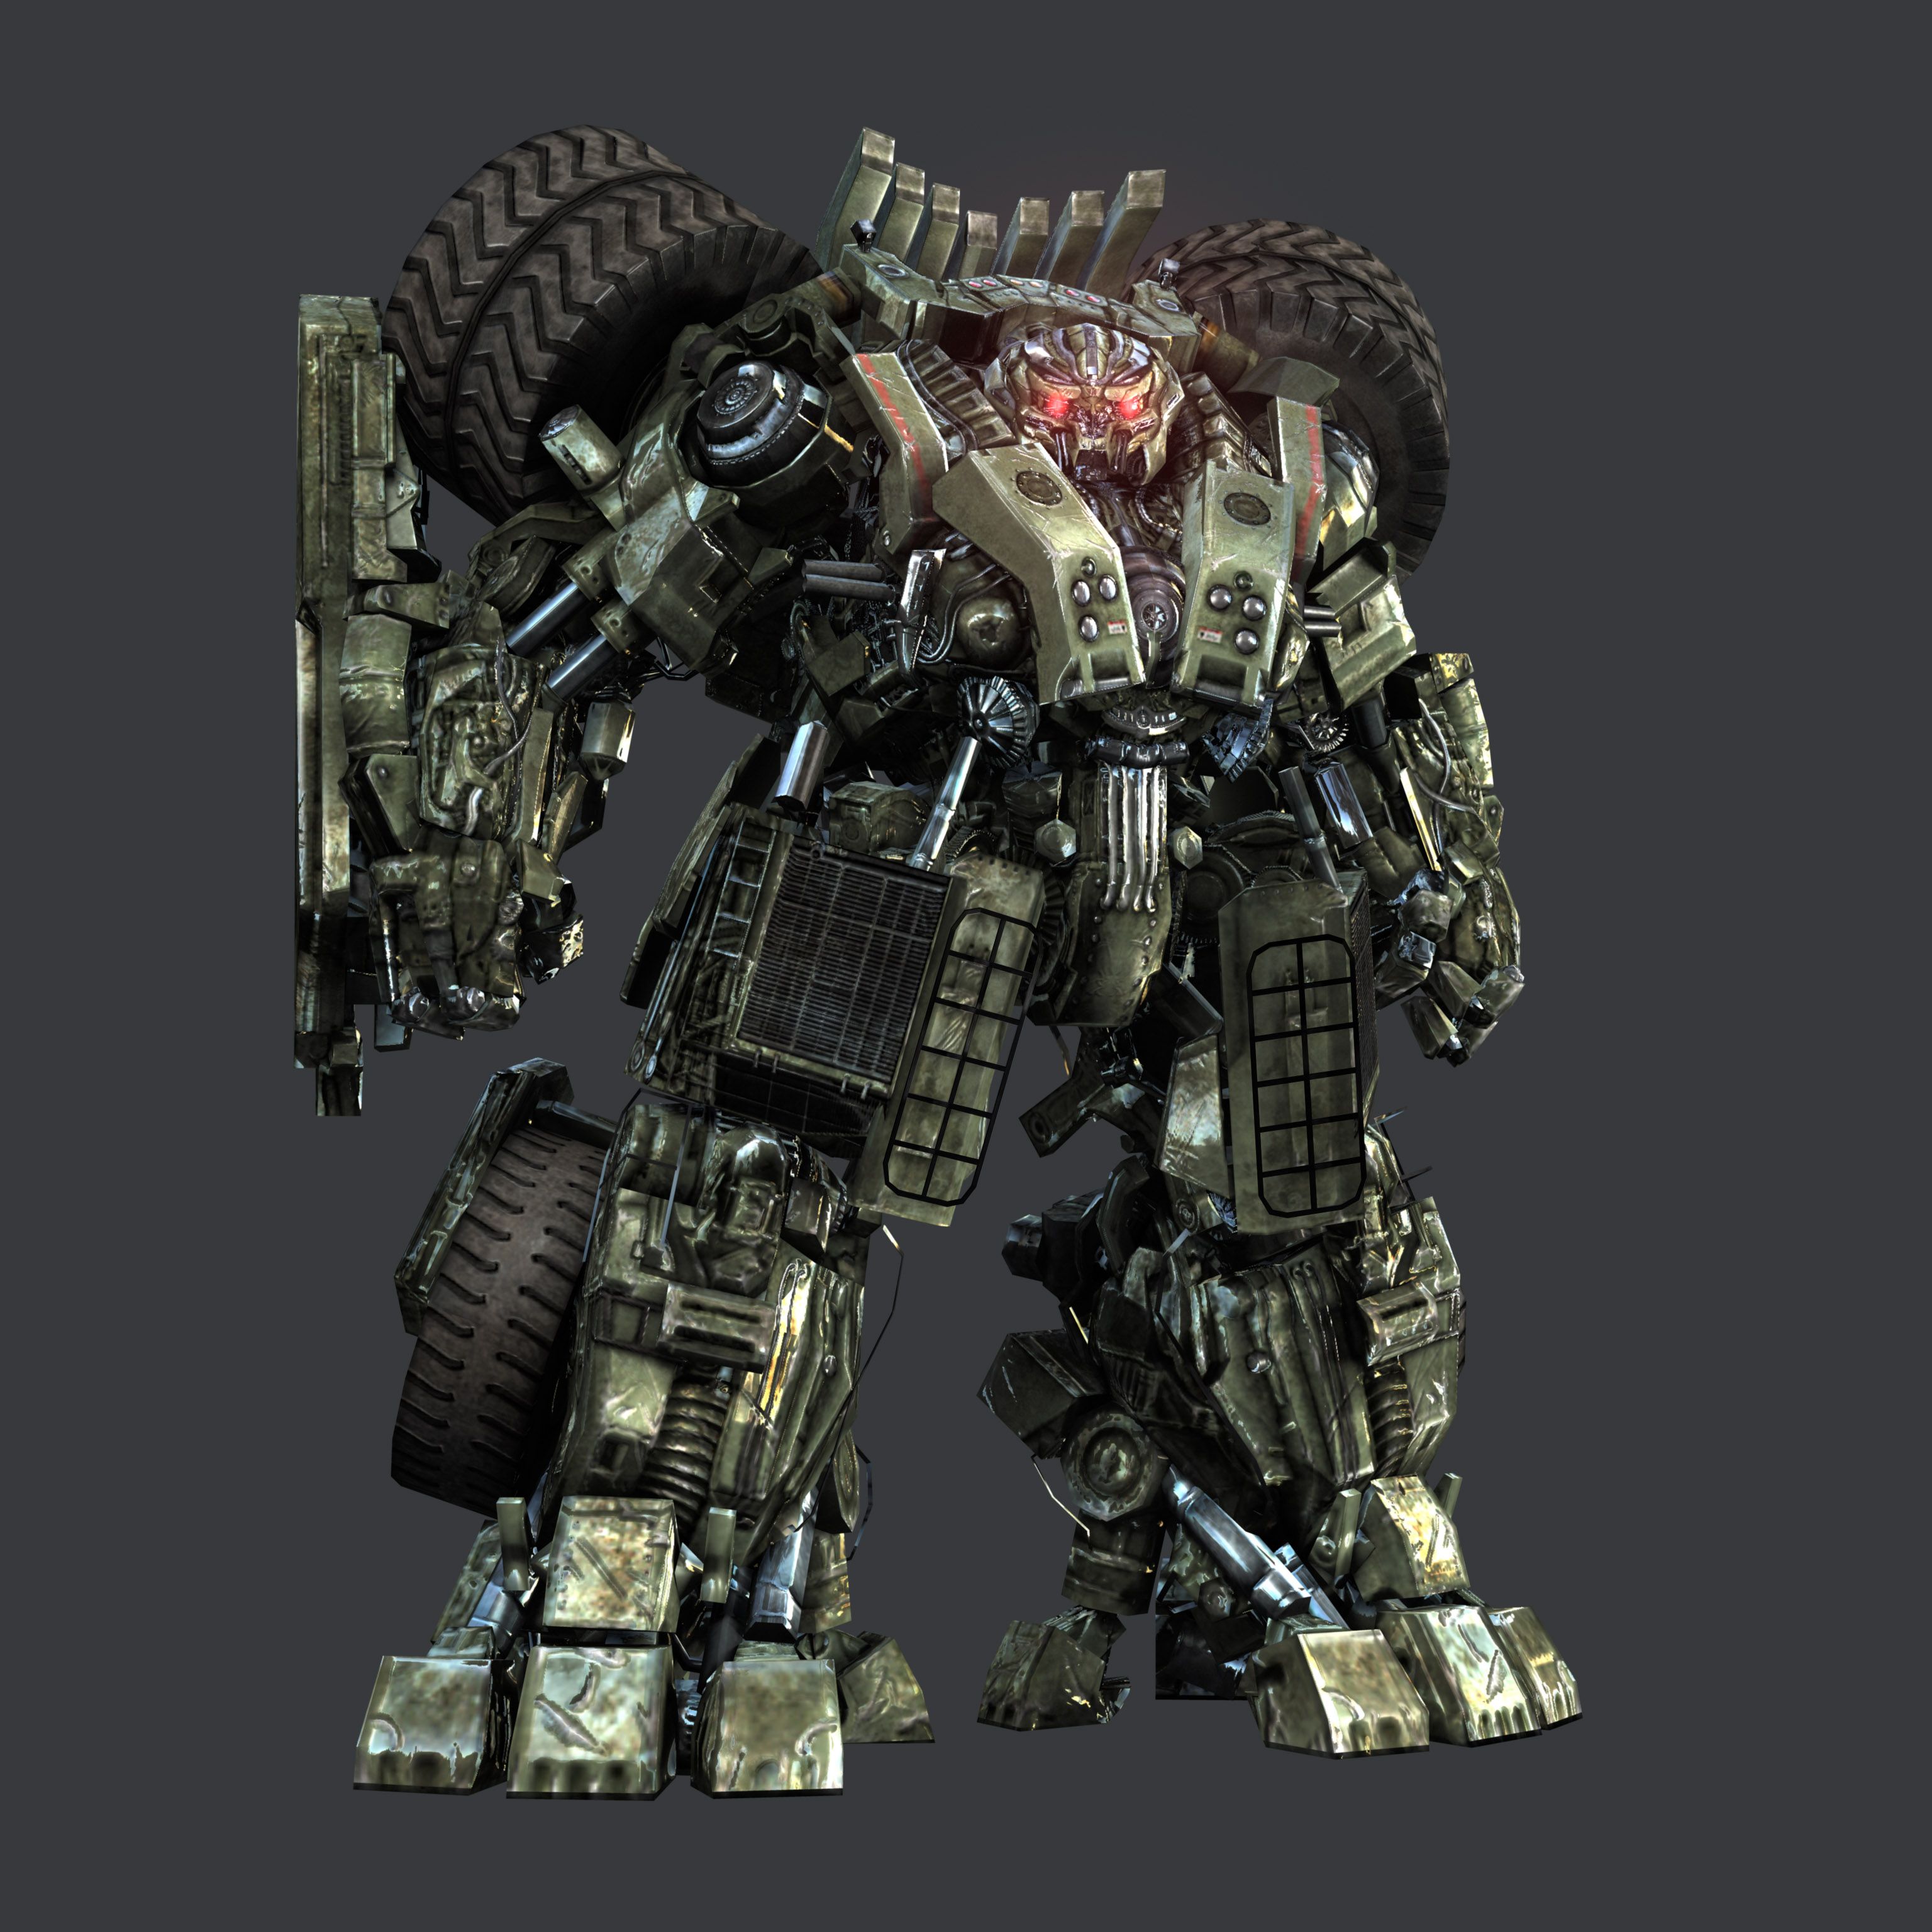 Official Image from Transformers Revenge of the Fallen Game